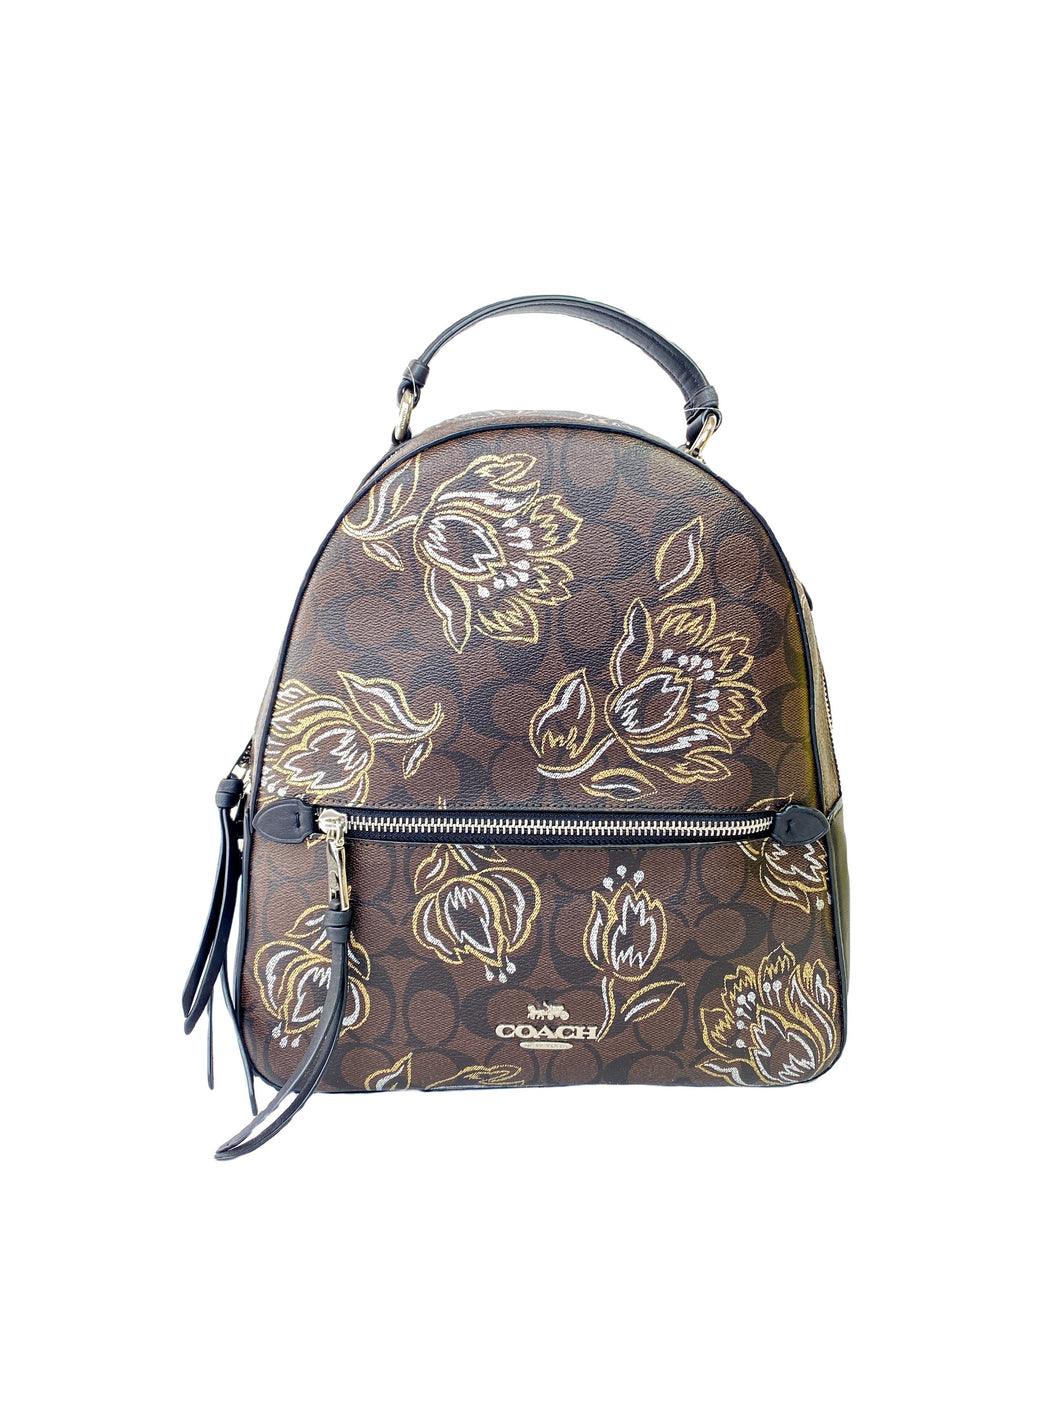 Coach black and brown signature floral backpack